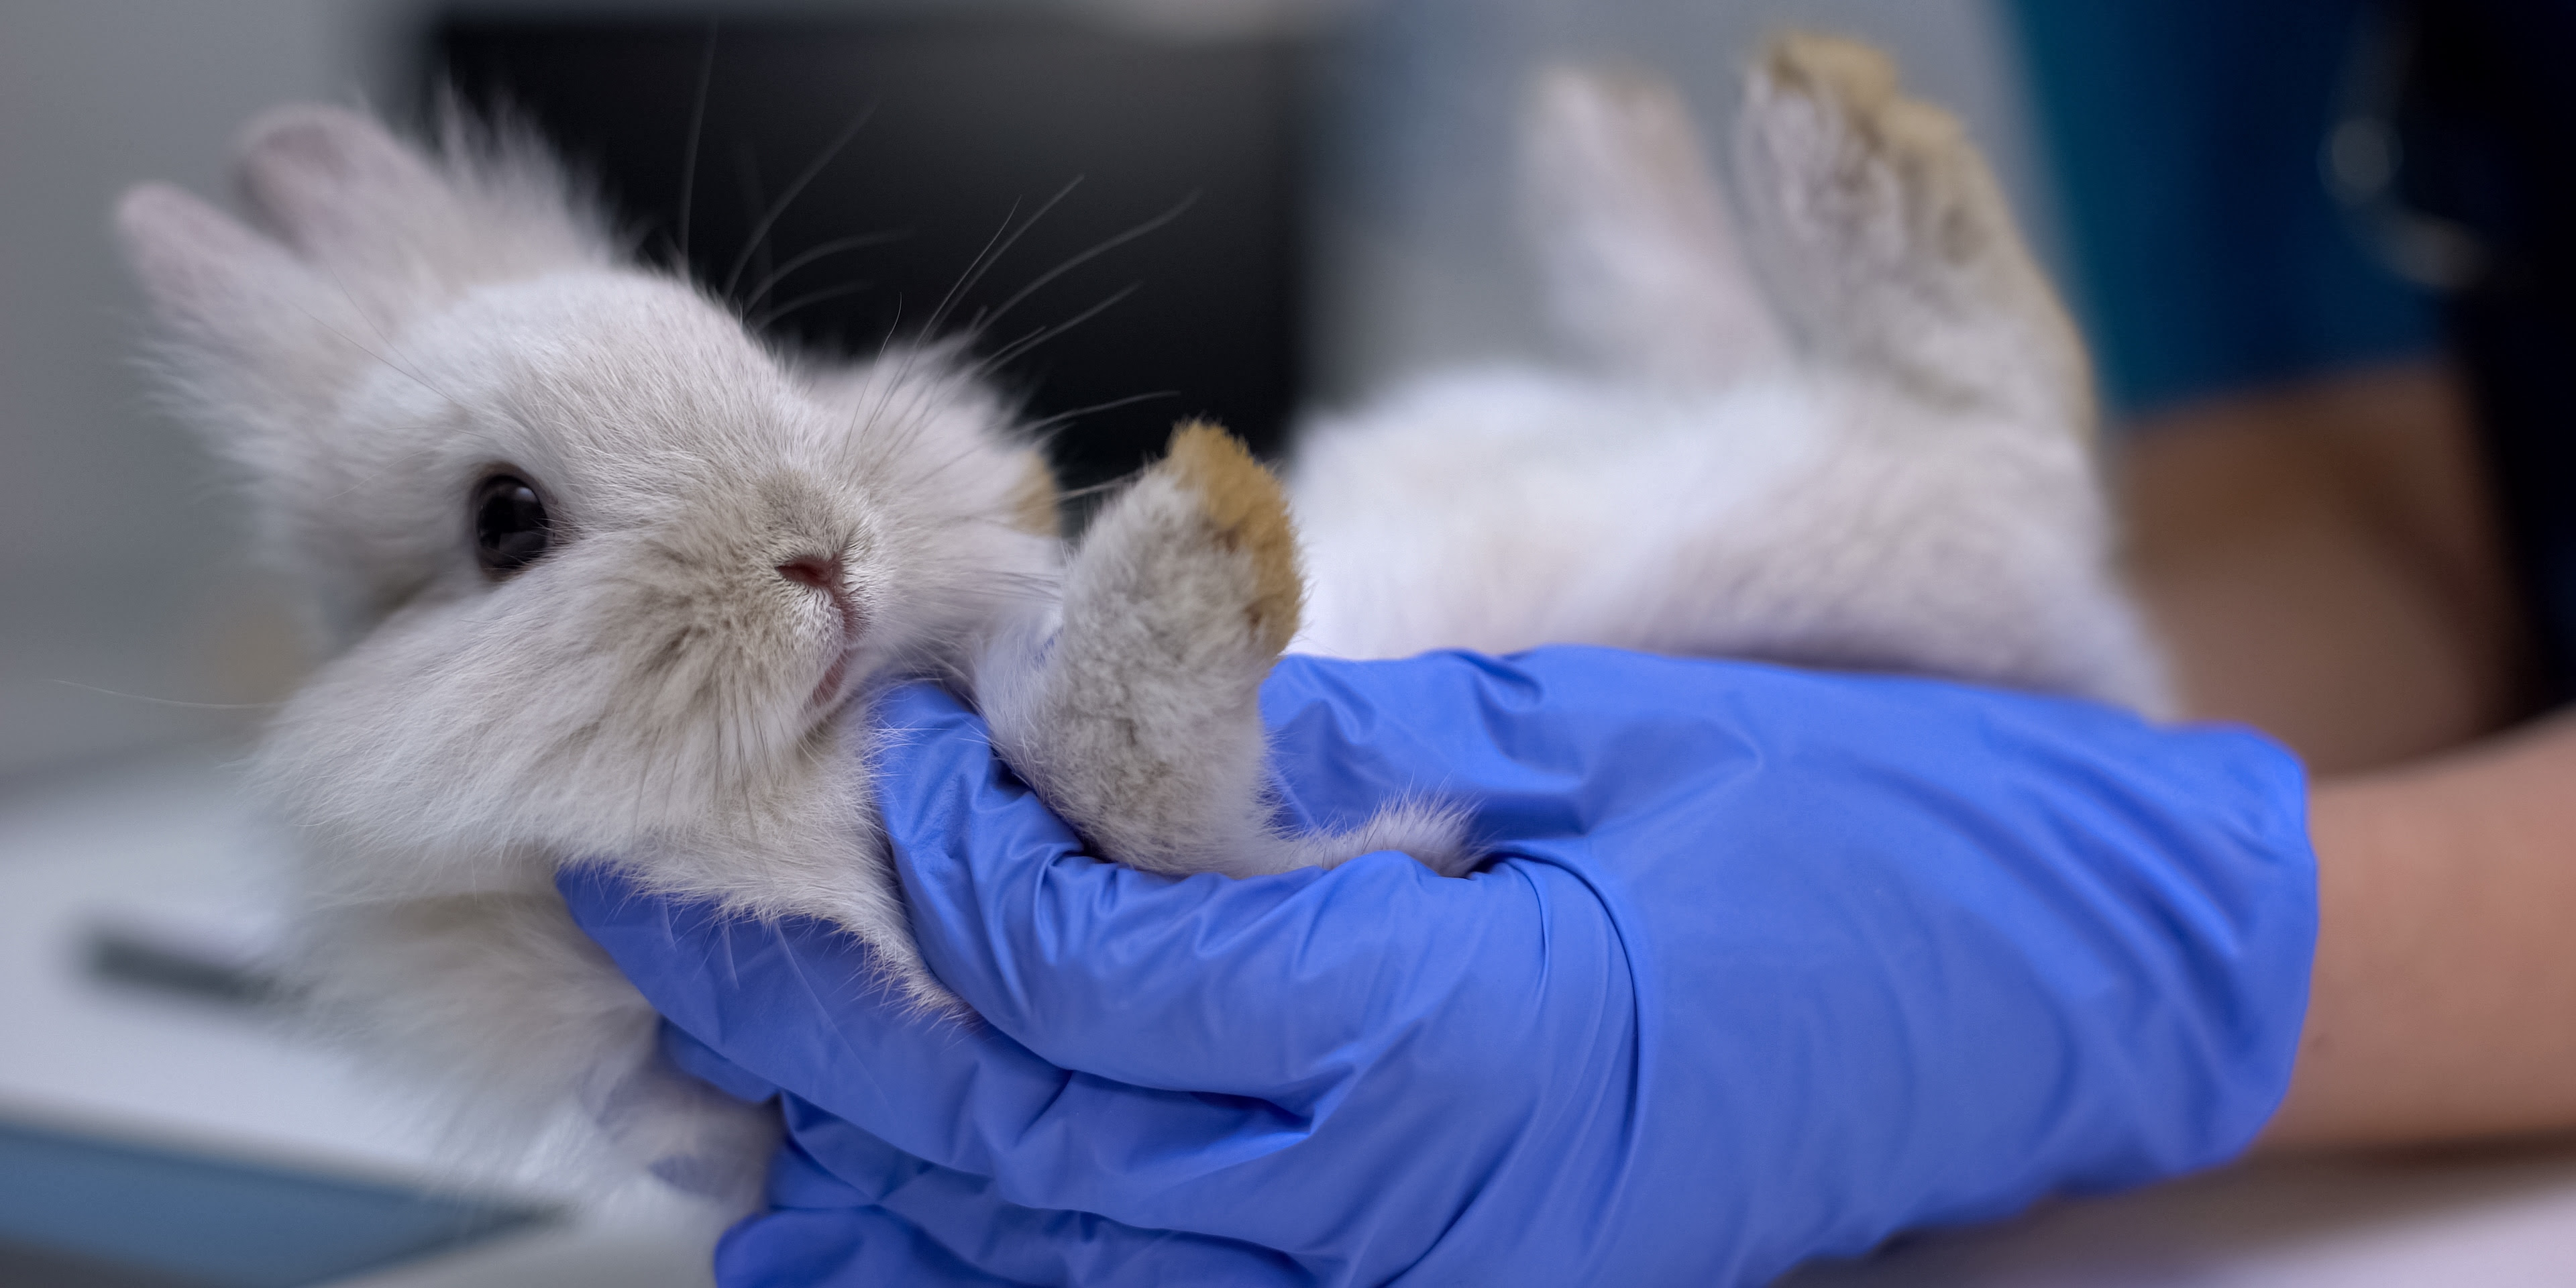 A small gray rabbit being held uncomfortably upside down by a pair of hands wearing latex gloves